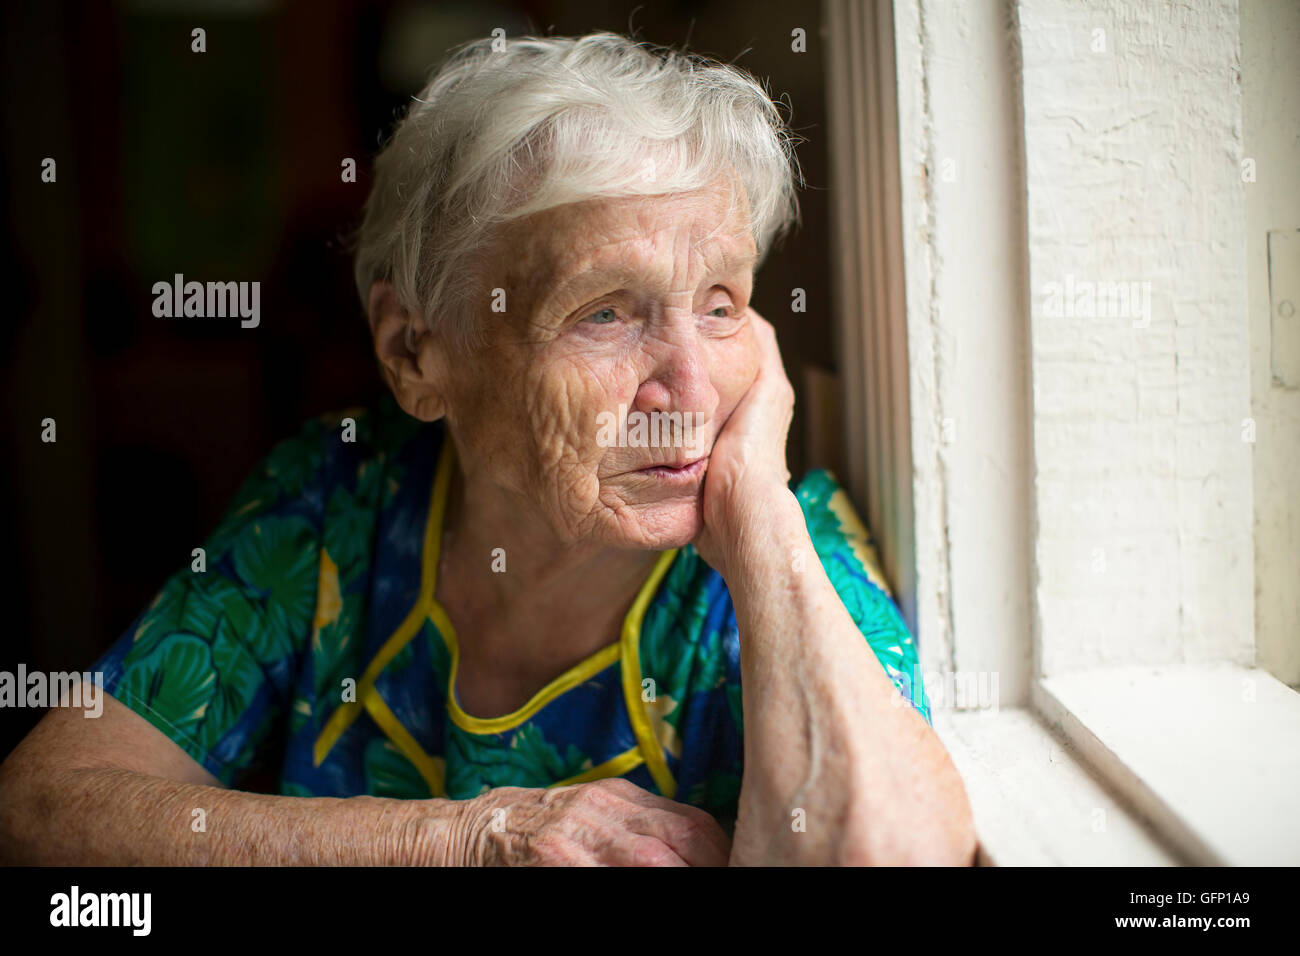 An elderly lady skeptically looking out the window. Stock Photo